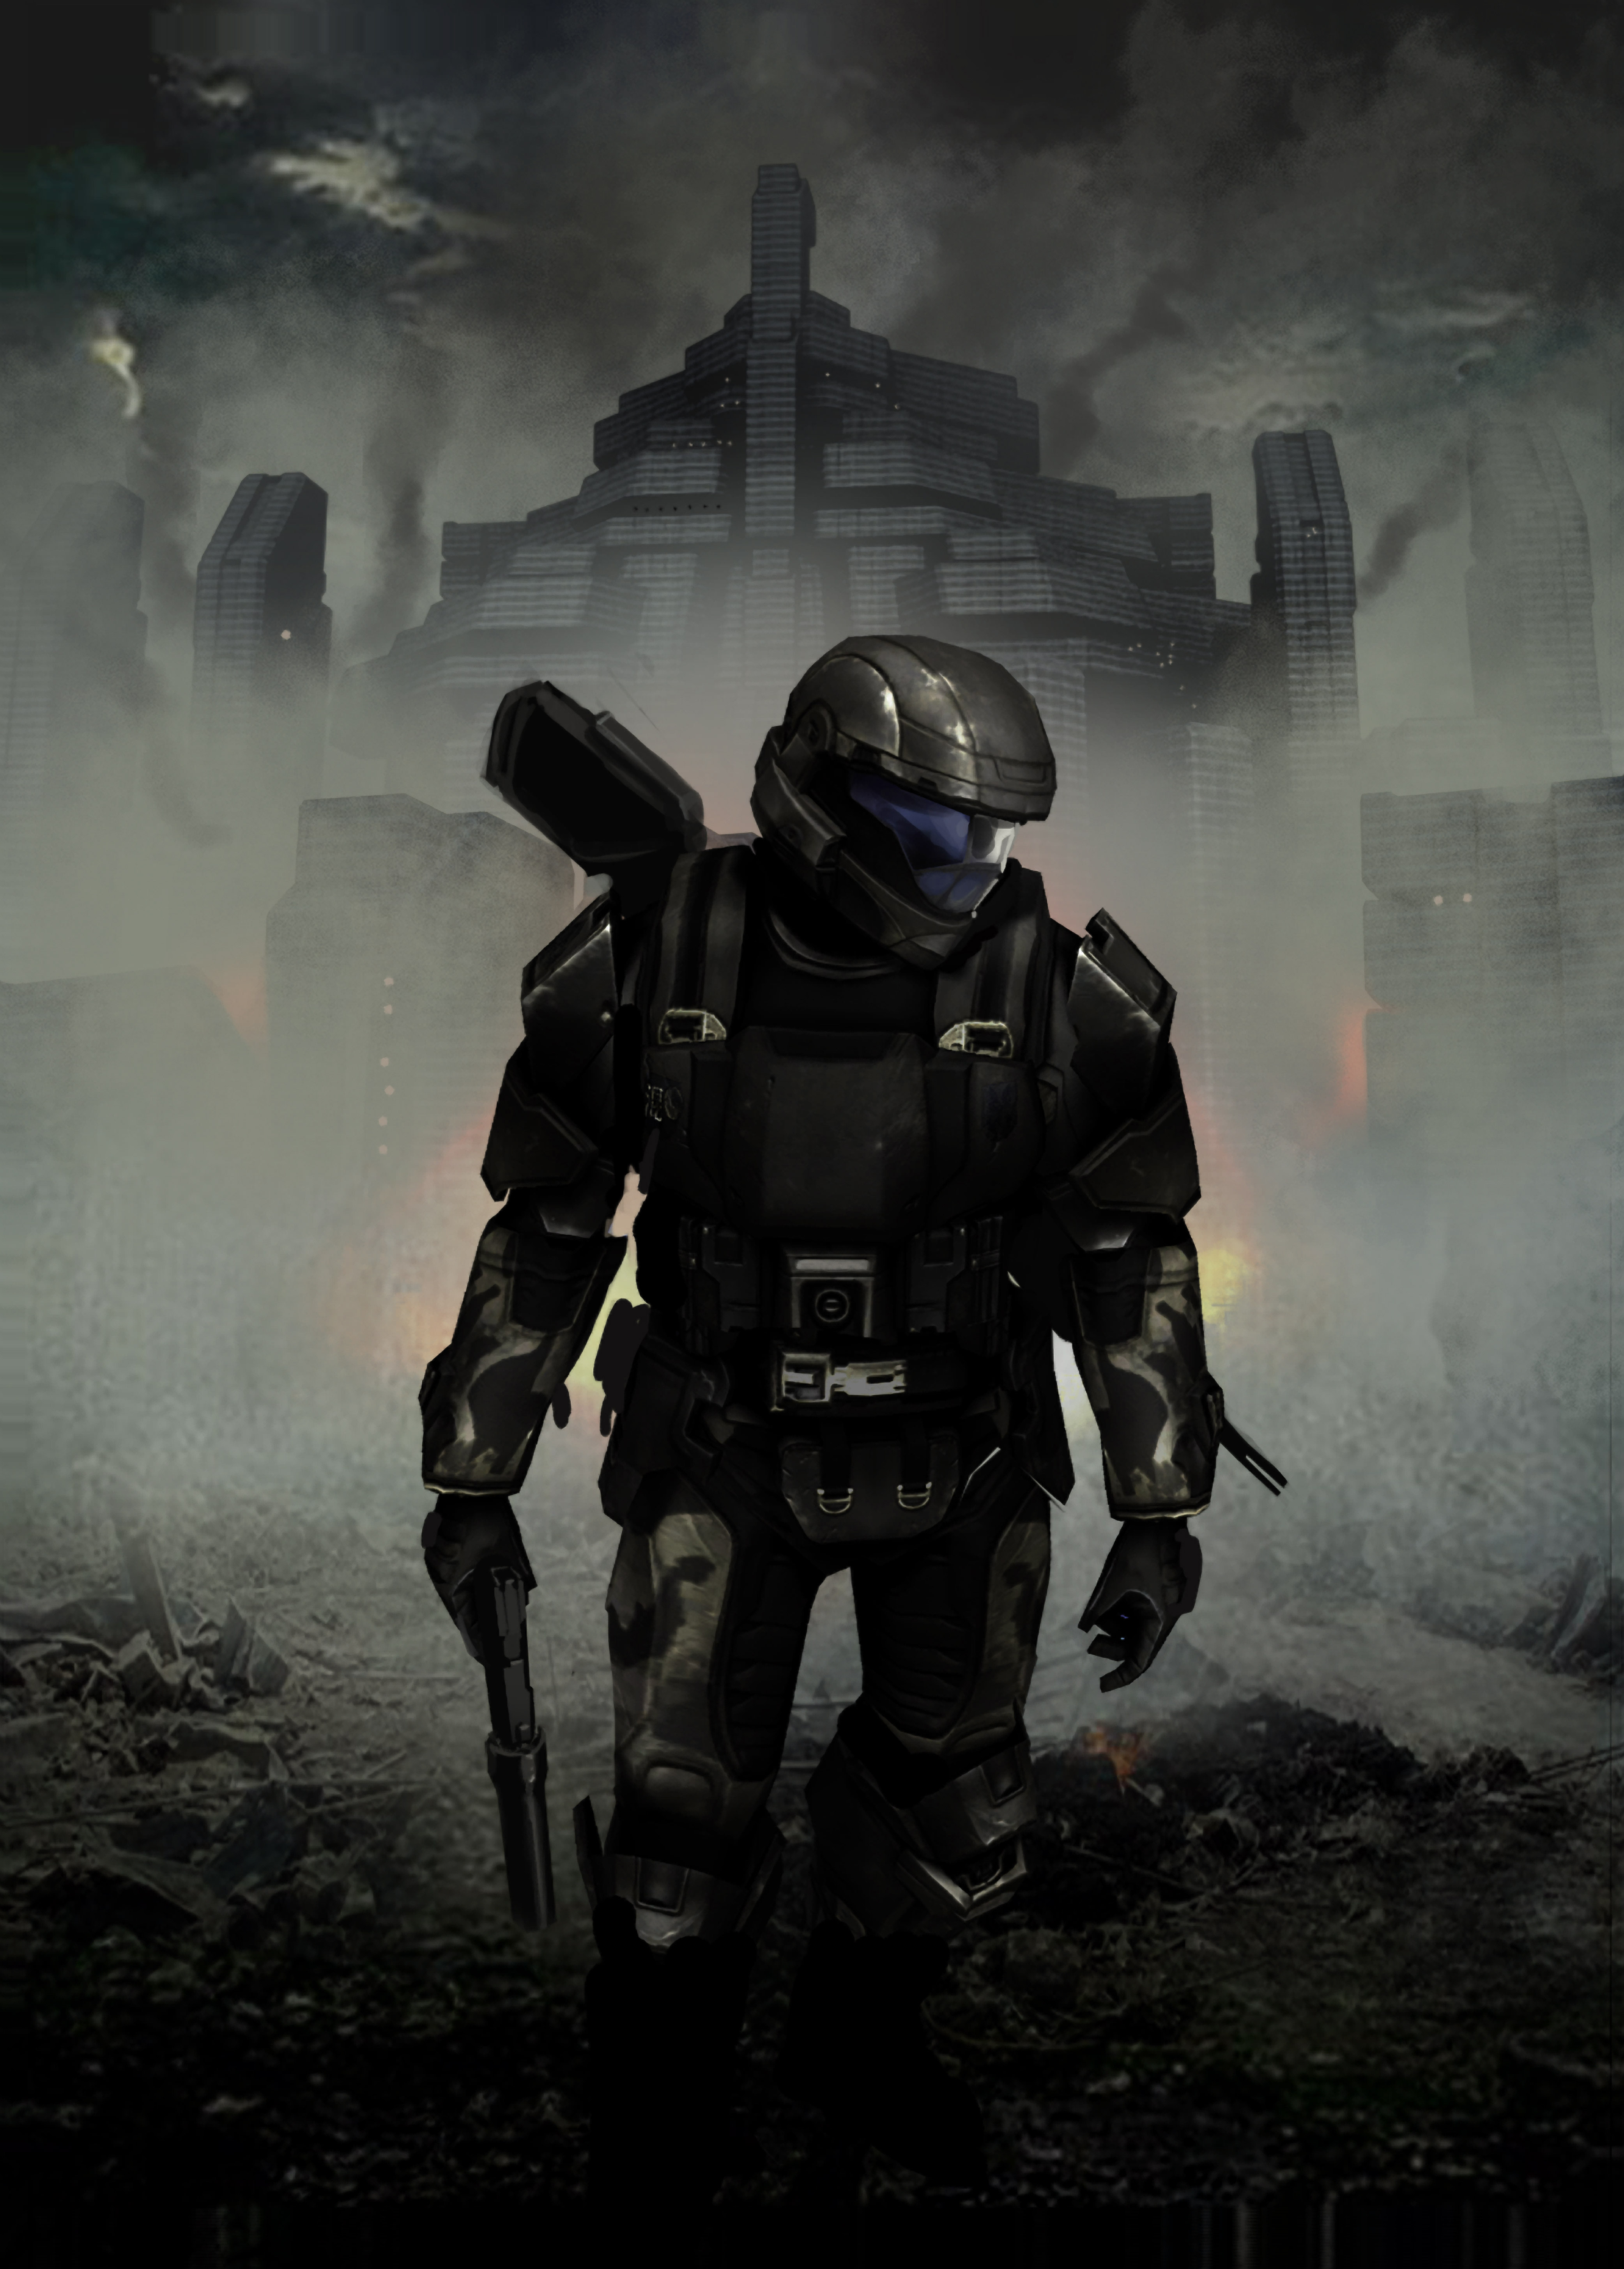 Halo 3 odst chronos pc game 2020 overview. 